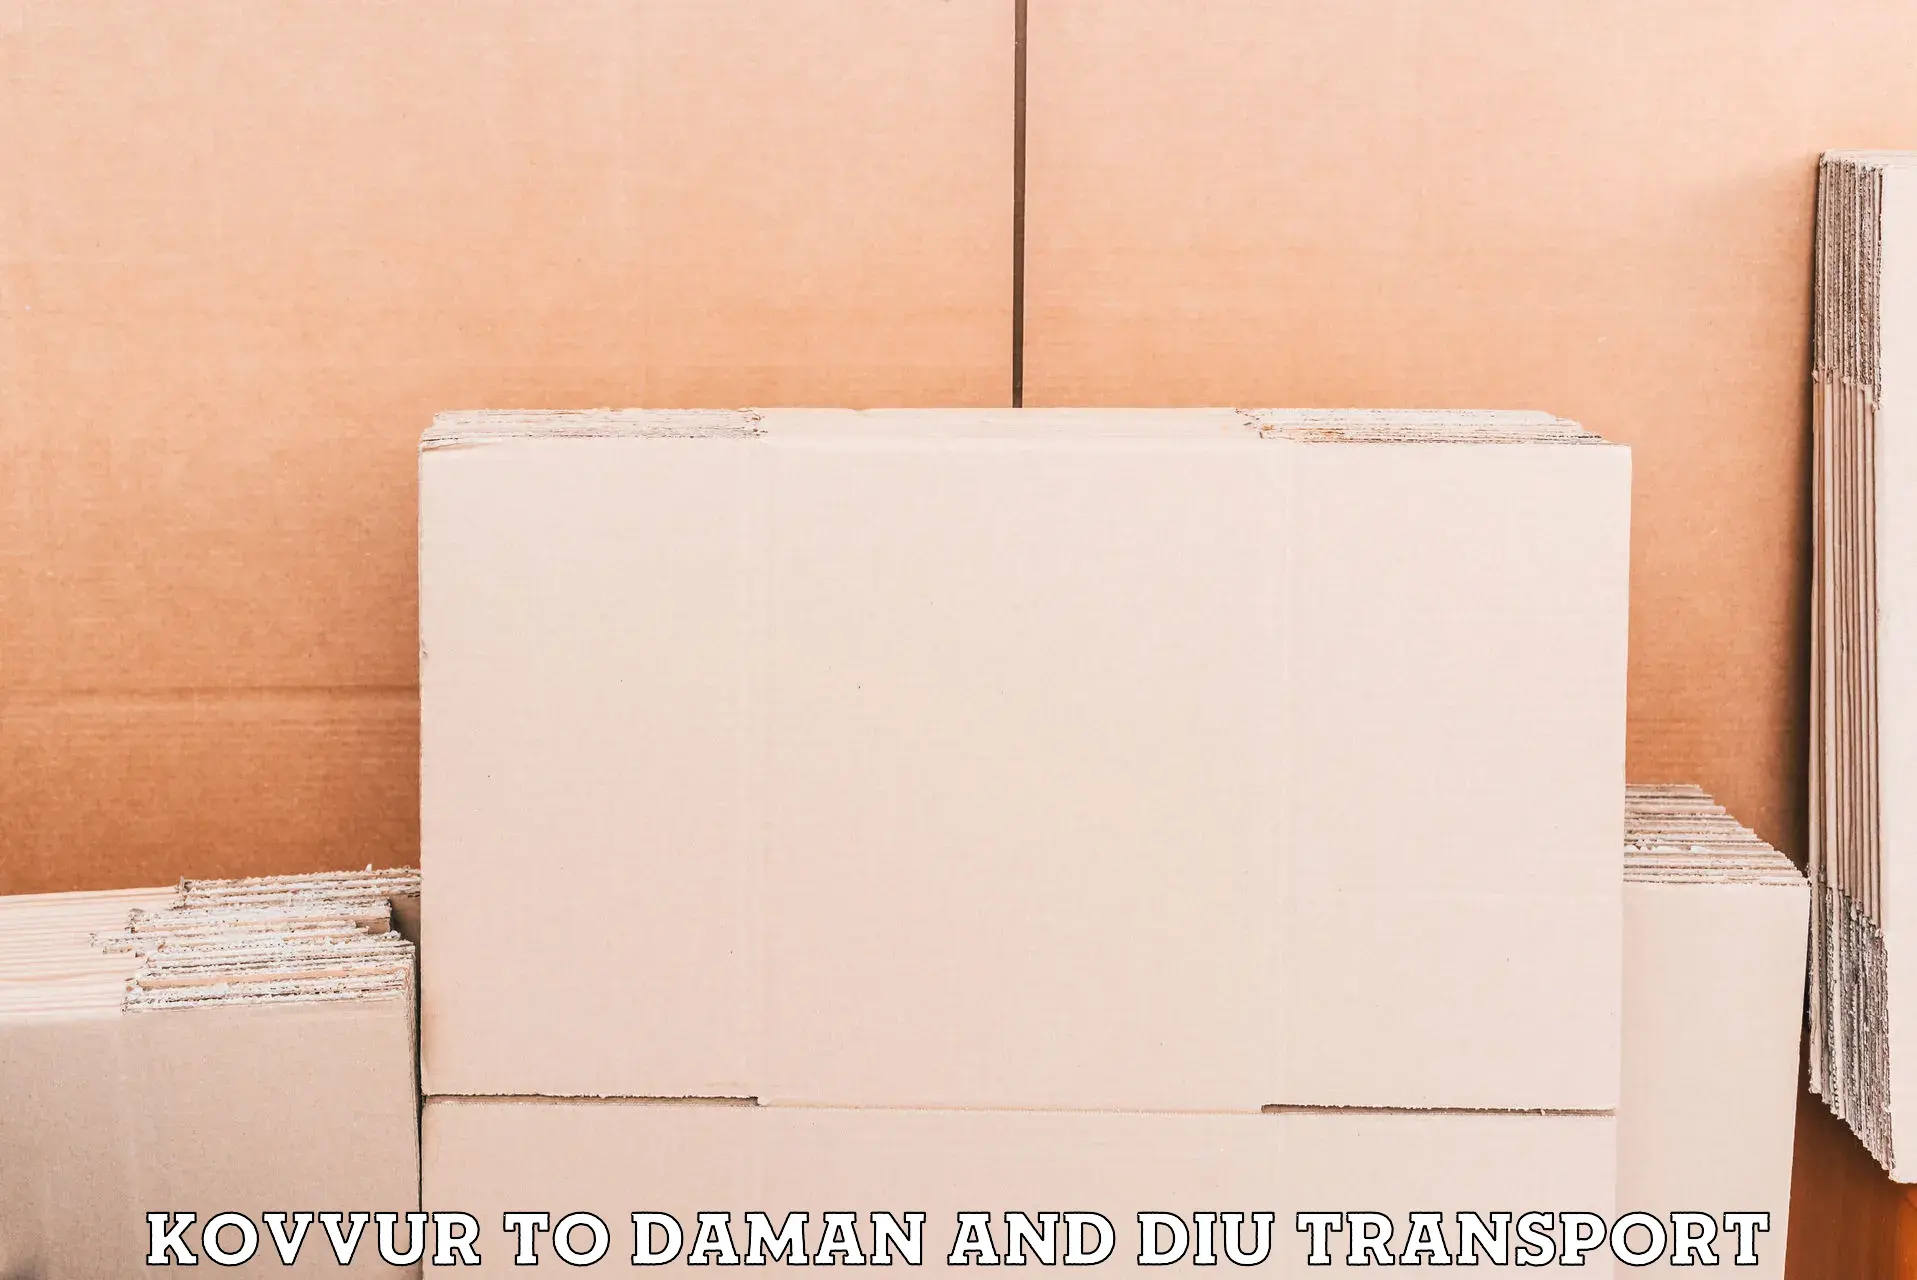 Container transport service Kovvur to Daman